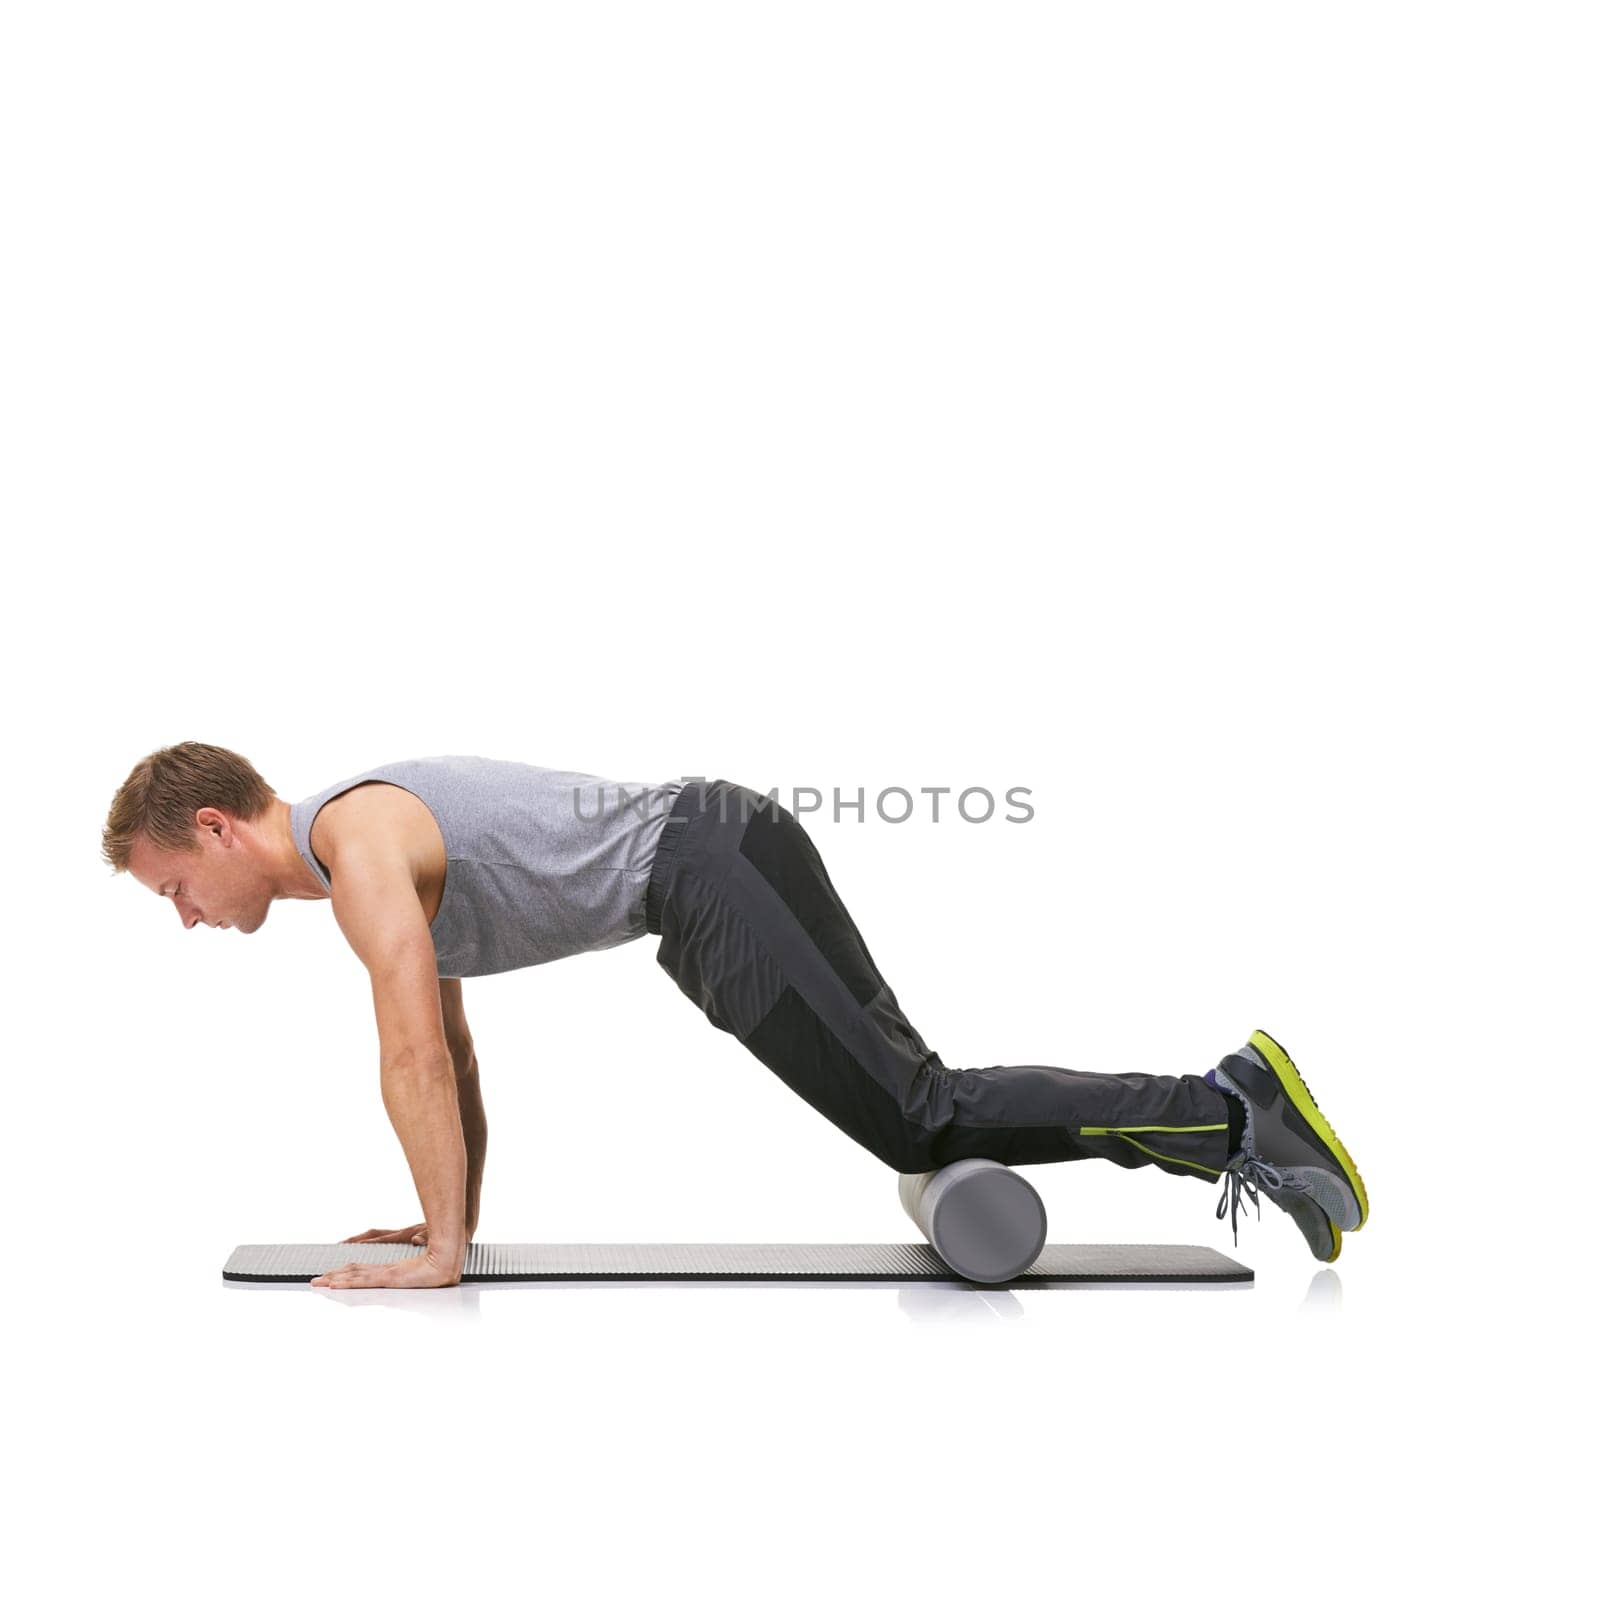 Arm exercise, foam roller and man in push up for strength training, muscle endurance or pilates rehabilitation workout on ground. Yoga mat, mockup studio space or active person on white background by YuriArcurs